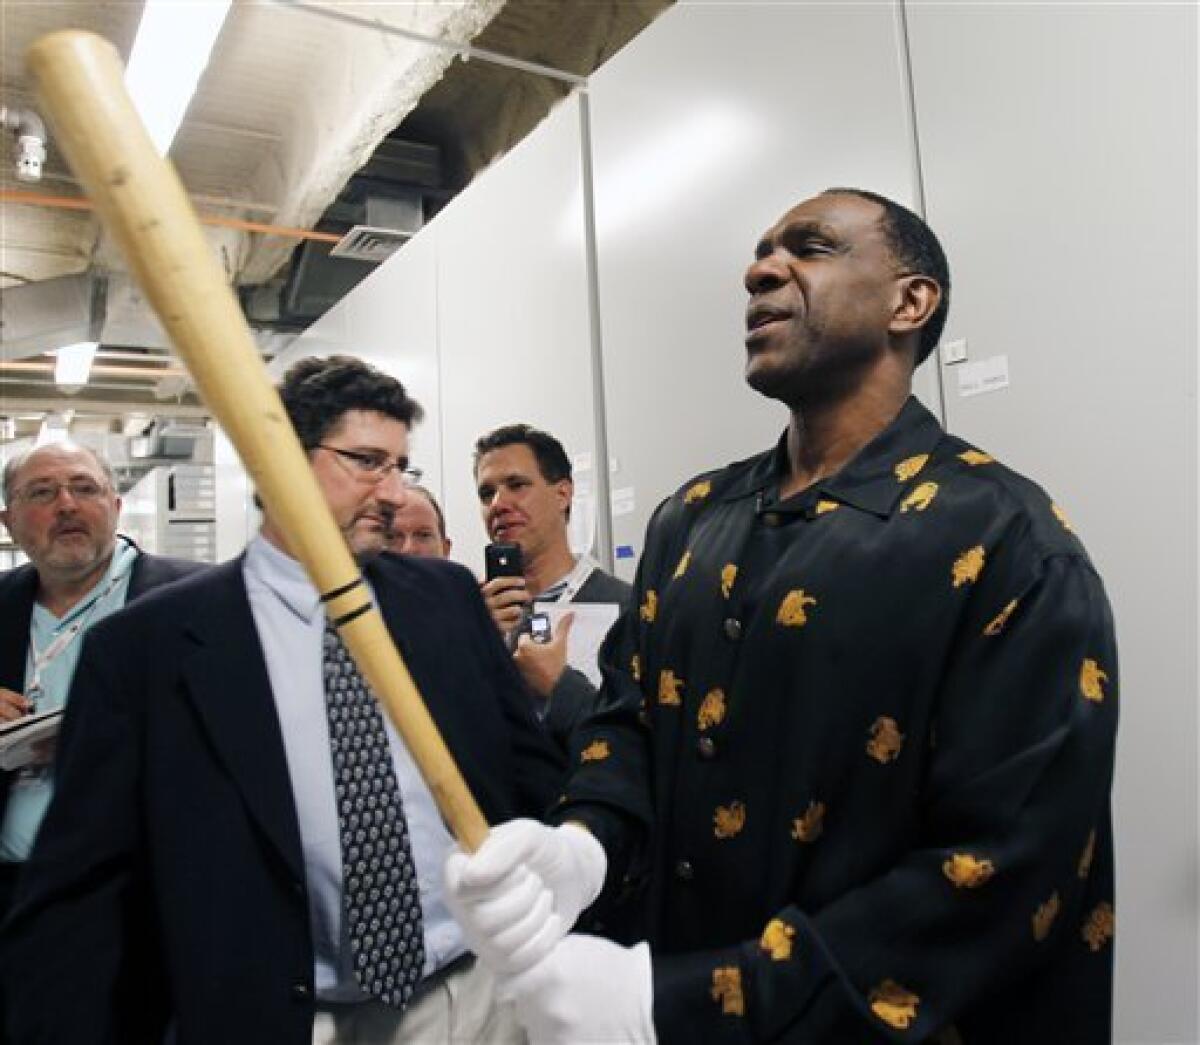 Andre Dawson elected to Hall of Fame - The San Diego Union-Tribune